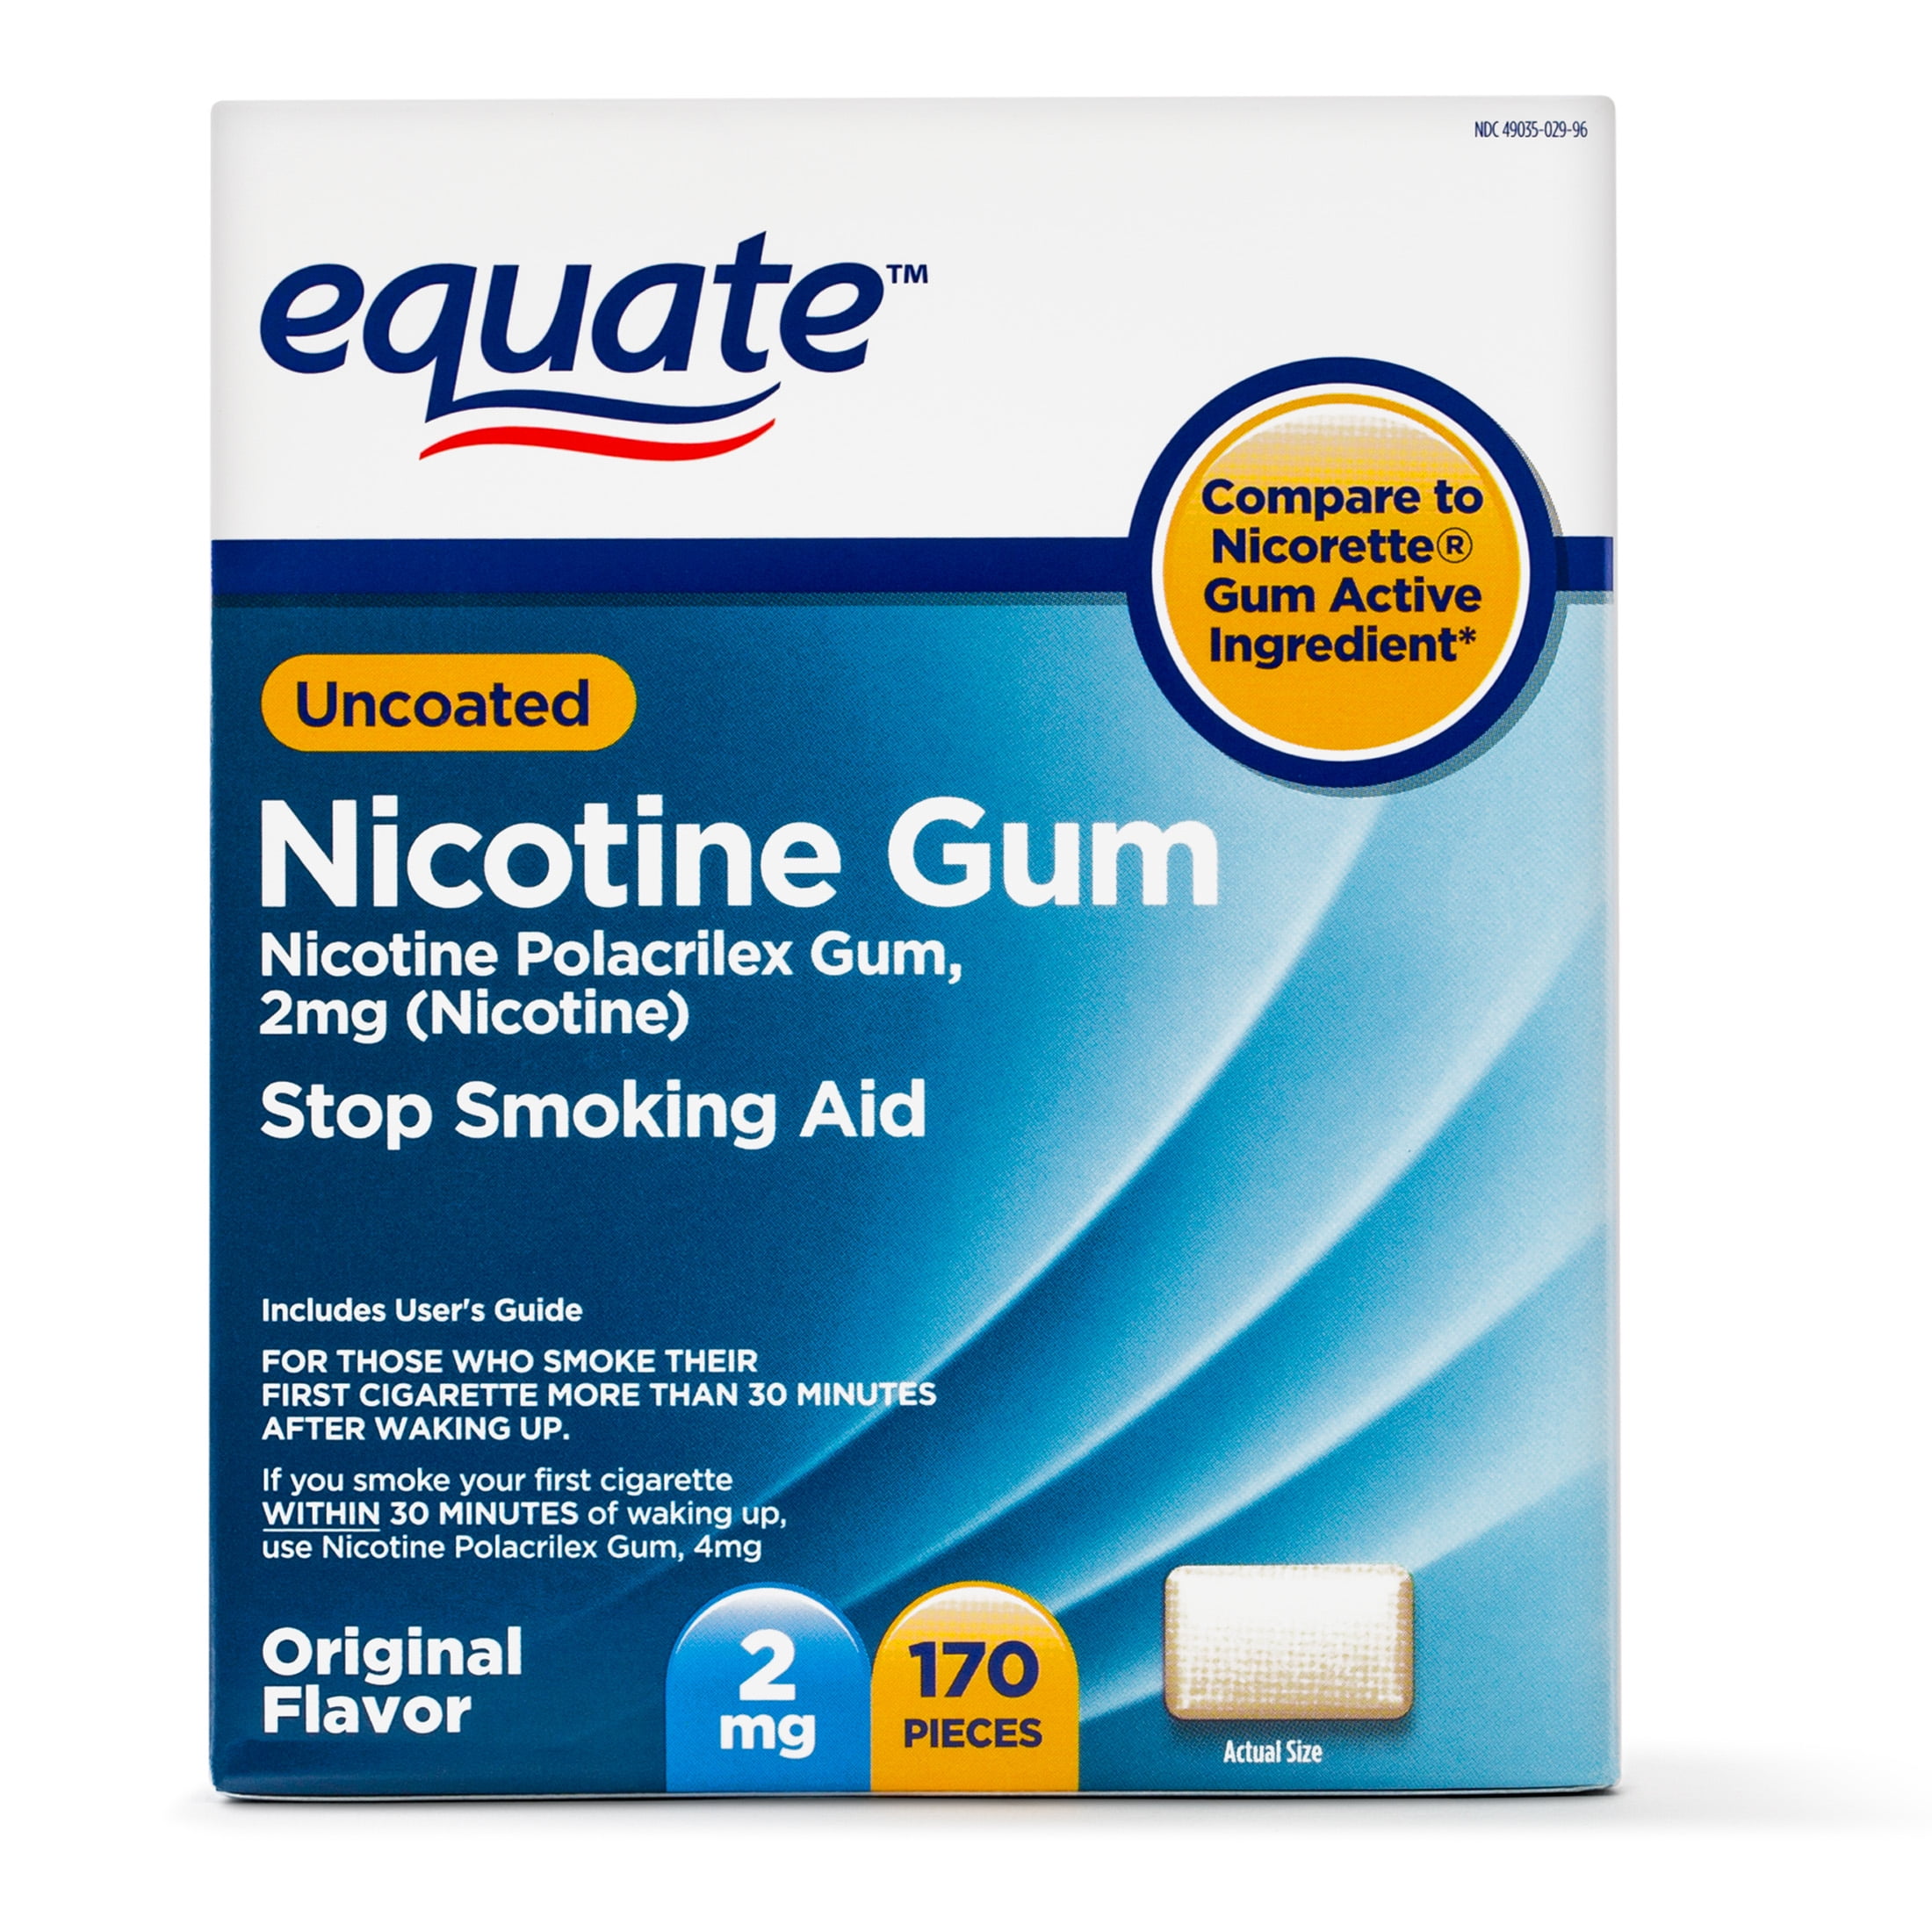 Equate Nicotine Uncoated Gum 2 Mg Original Flavor 170 Count